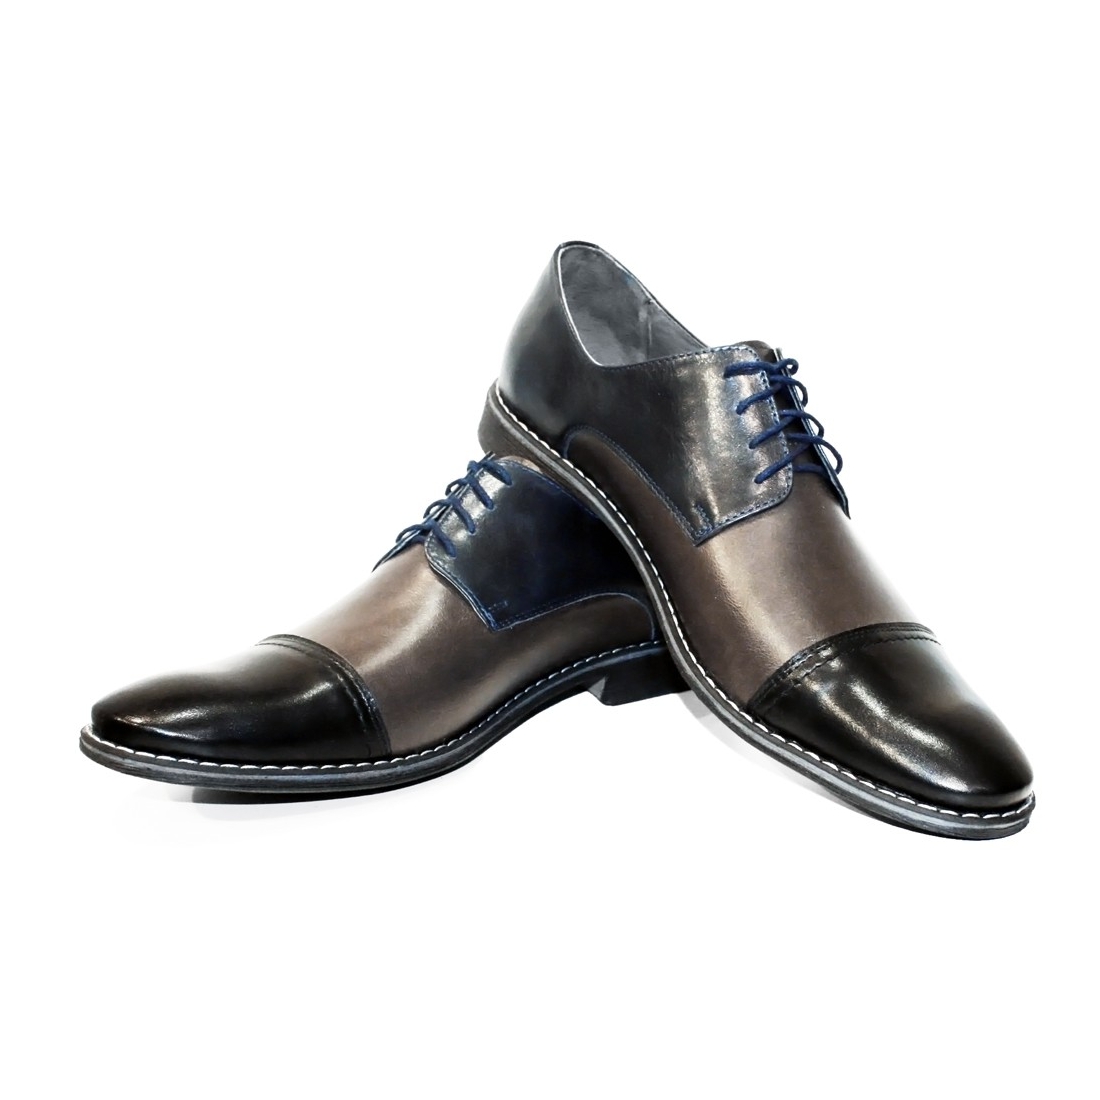 Modello Masorro - Gray Lace-Up Oxfords Dress Shoes - Cowhide Smooth Leather